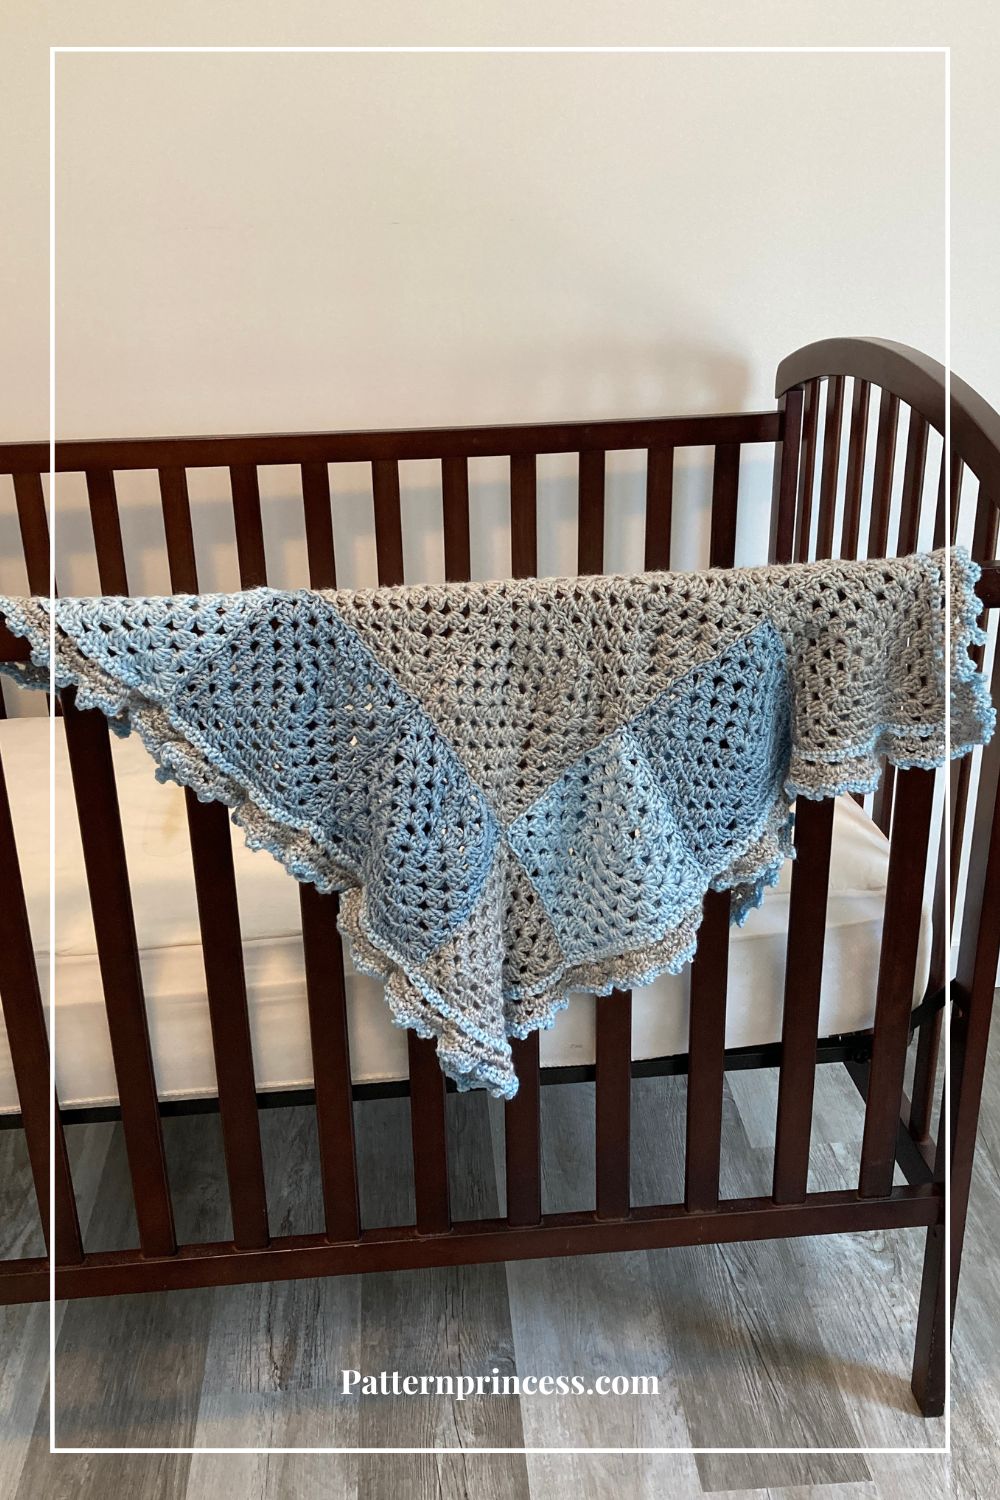 Blue and Grey Baby blanket on crib